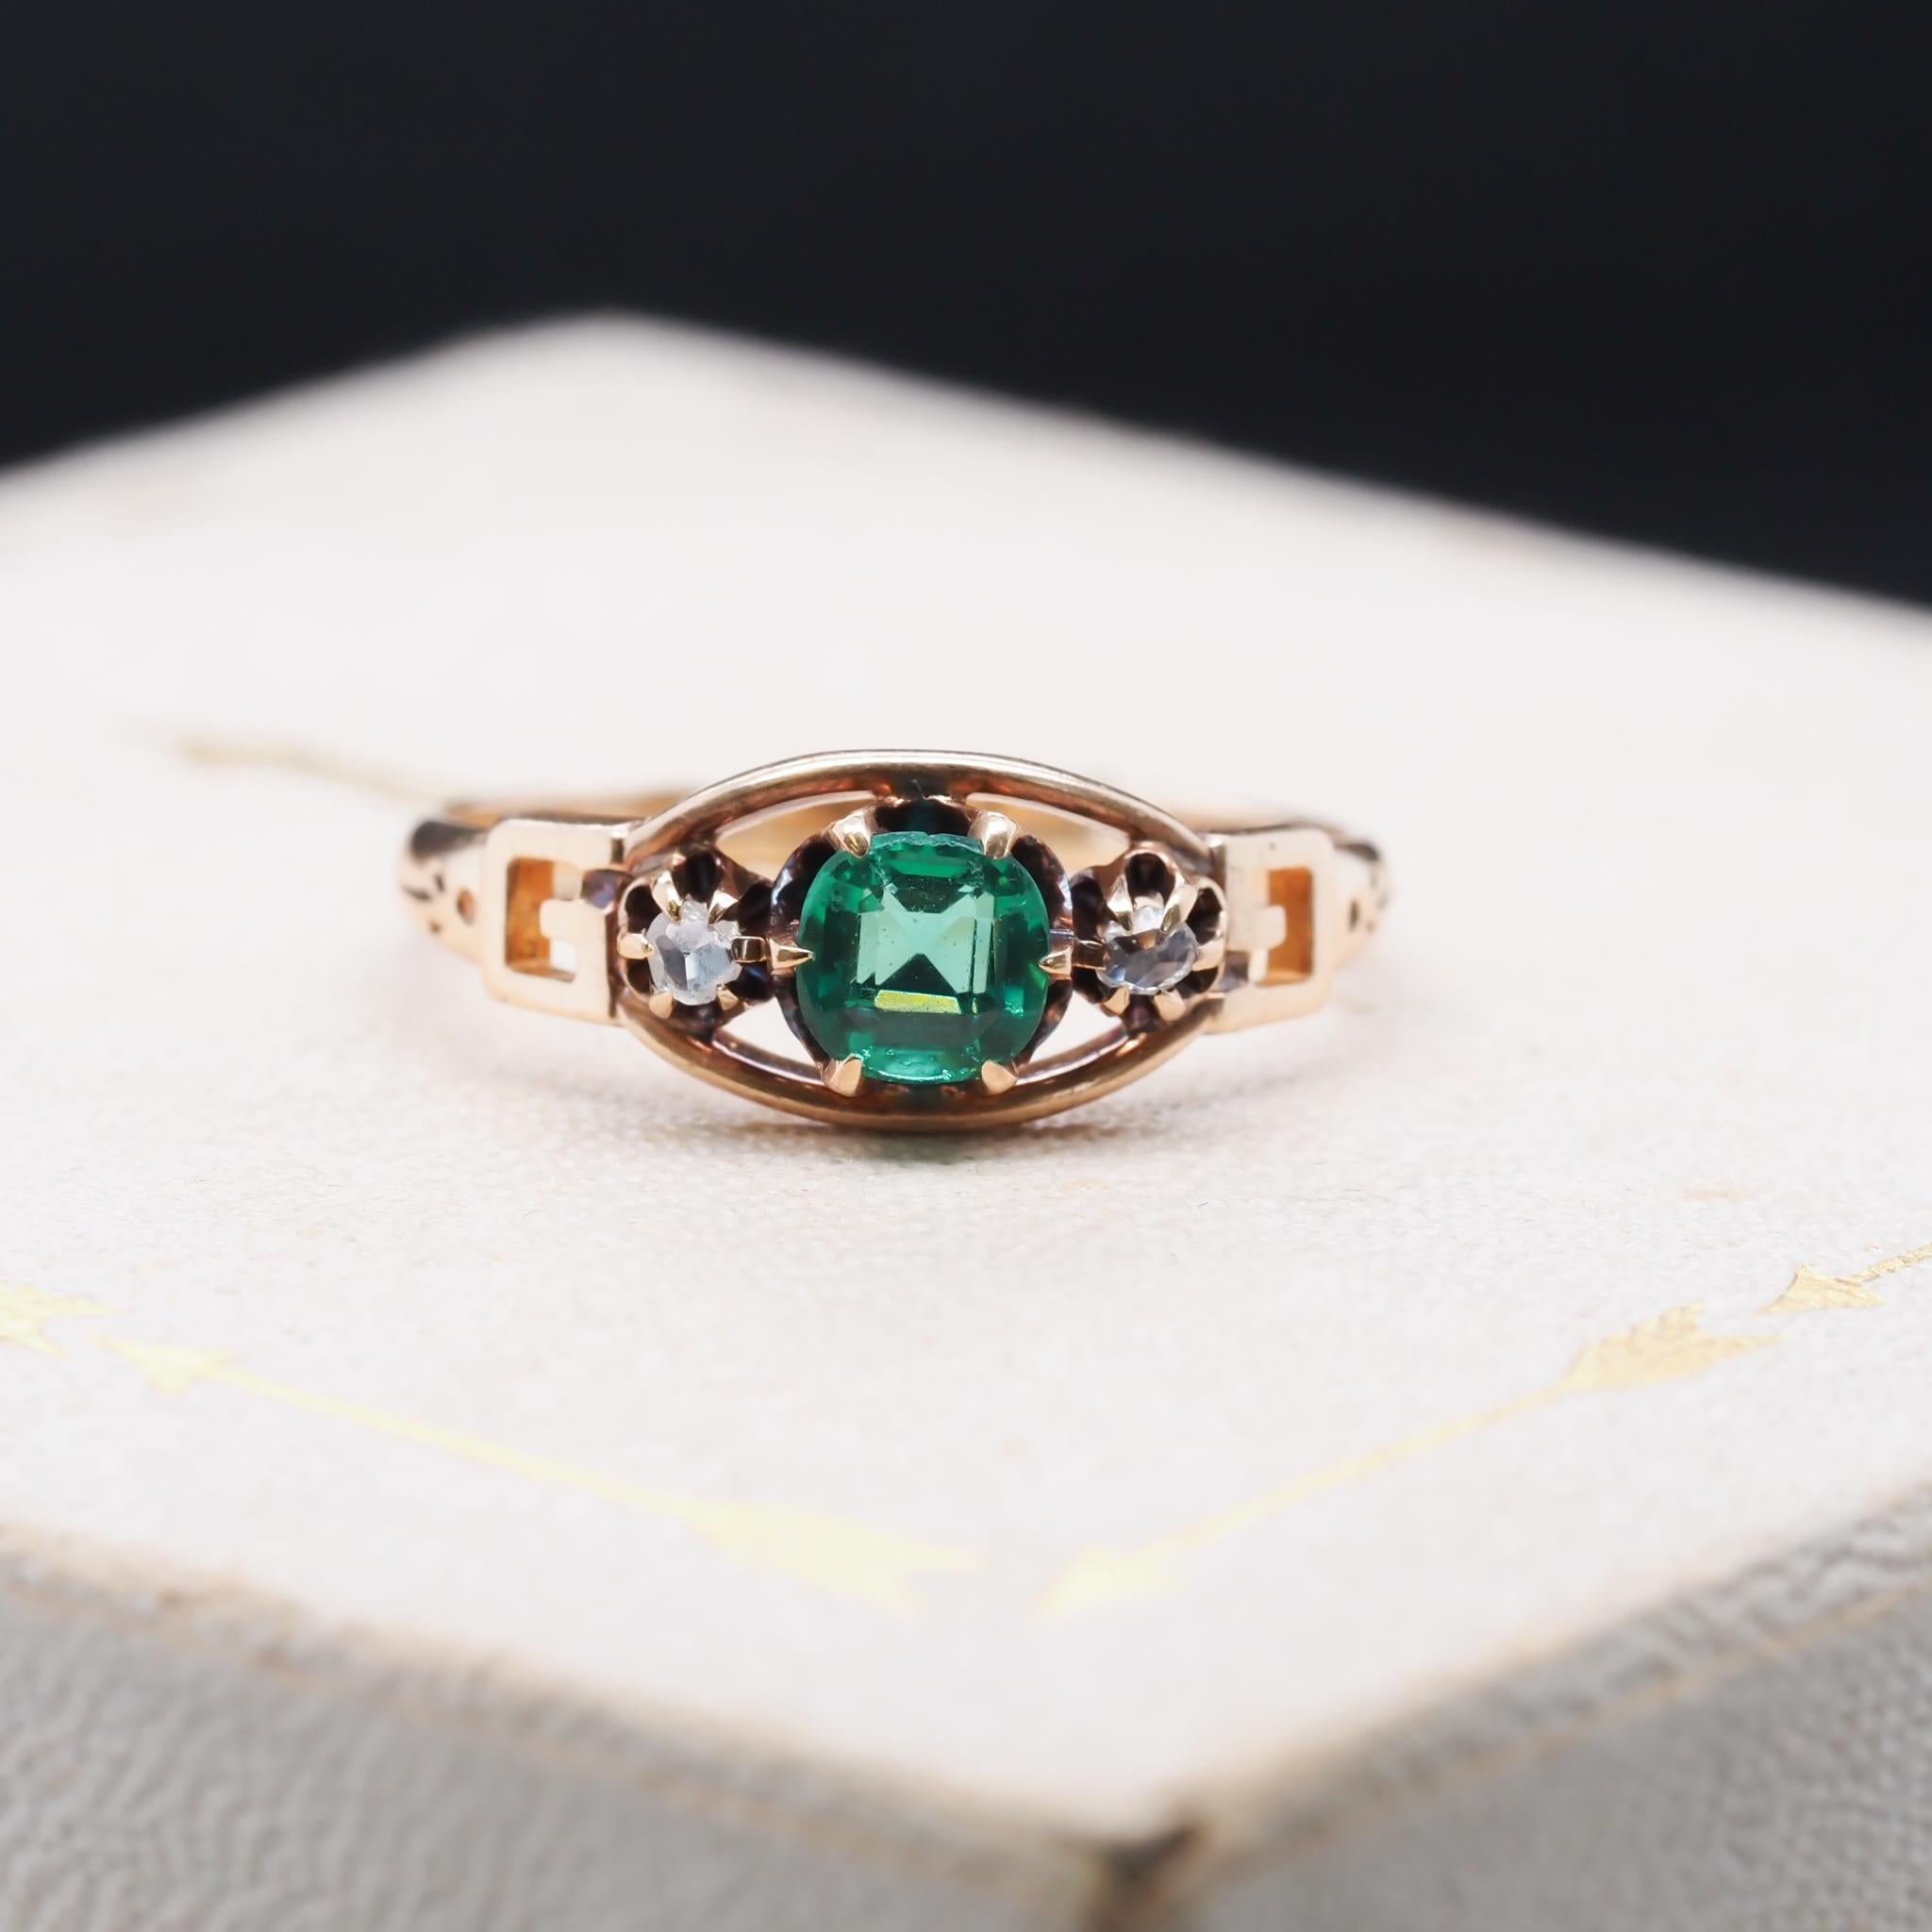 Item Details:
Ring Size: 7
Metal Type: 14K Yellow Gold [Hallmarked, and Tested]
Weight: 1.8 grams
Center Emerald: .25ct, Antique Cushion Shape, Green, Natural
Side Diamonds: Rose Cut, .08ct total weight, H Color, SI Clarity
Band Width: